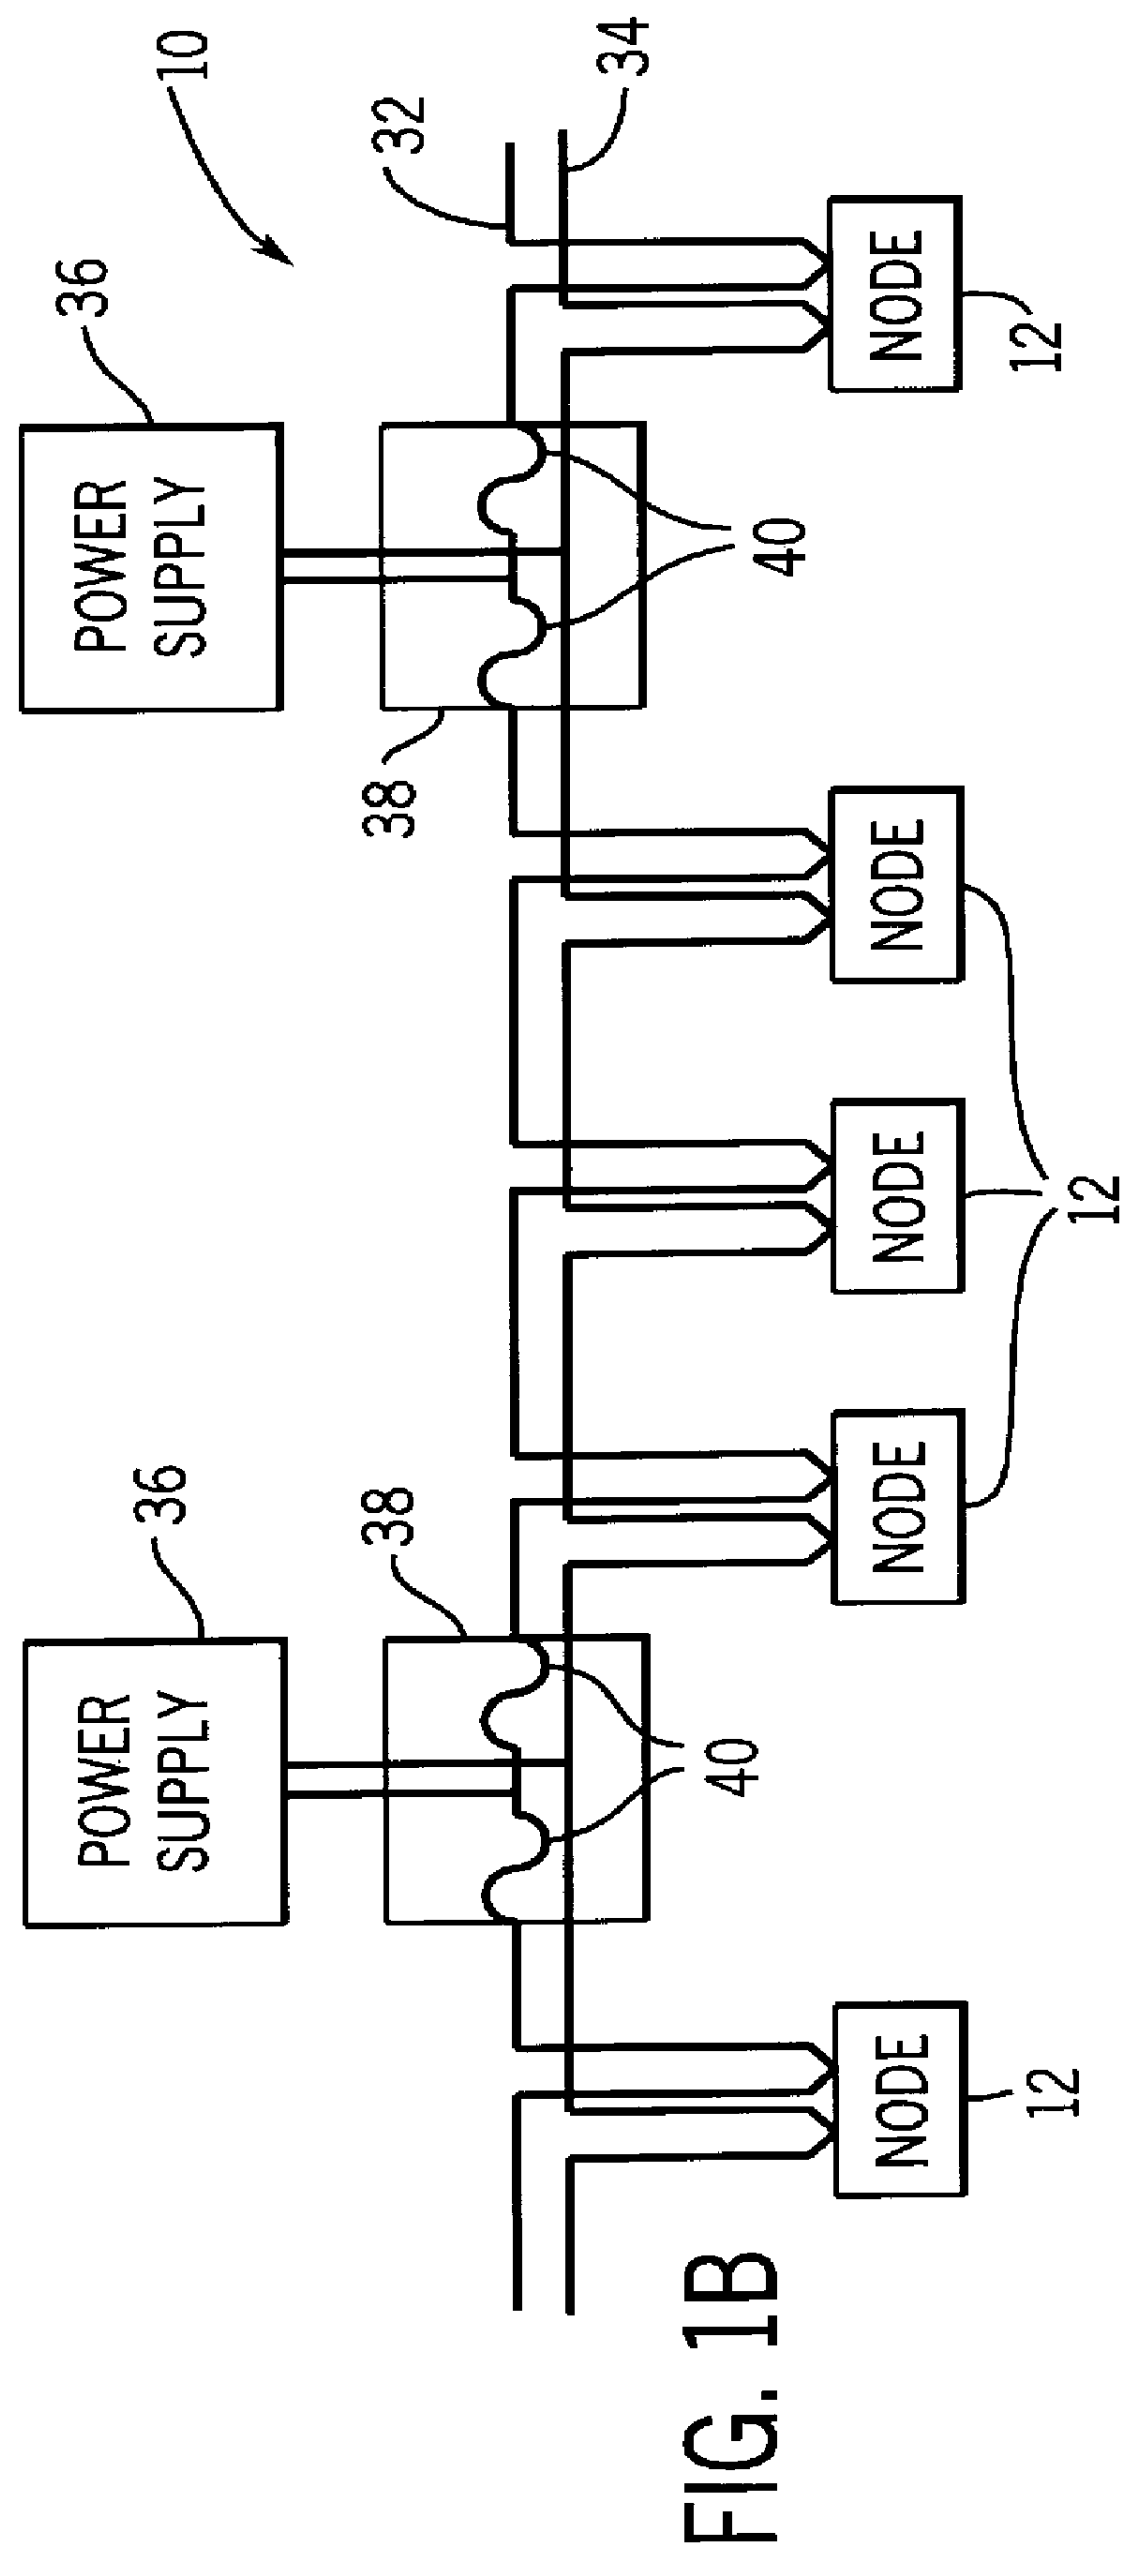 Method and apparatus for transmitting power and data signals via a network connector system including integral power capacitors